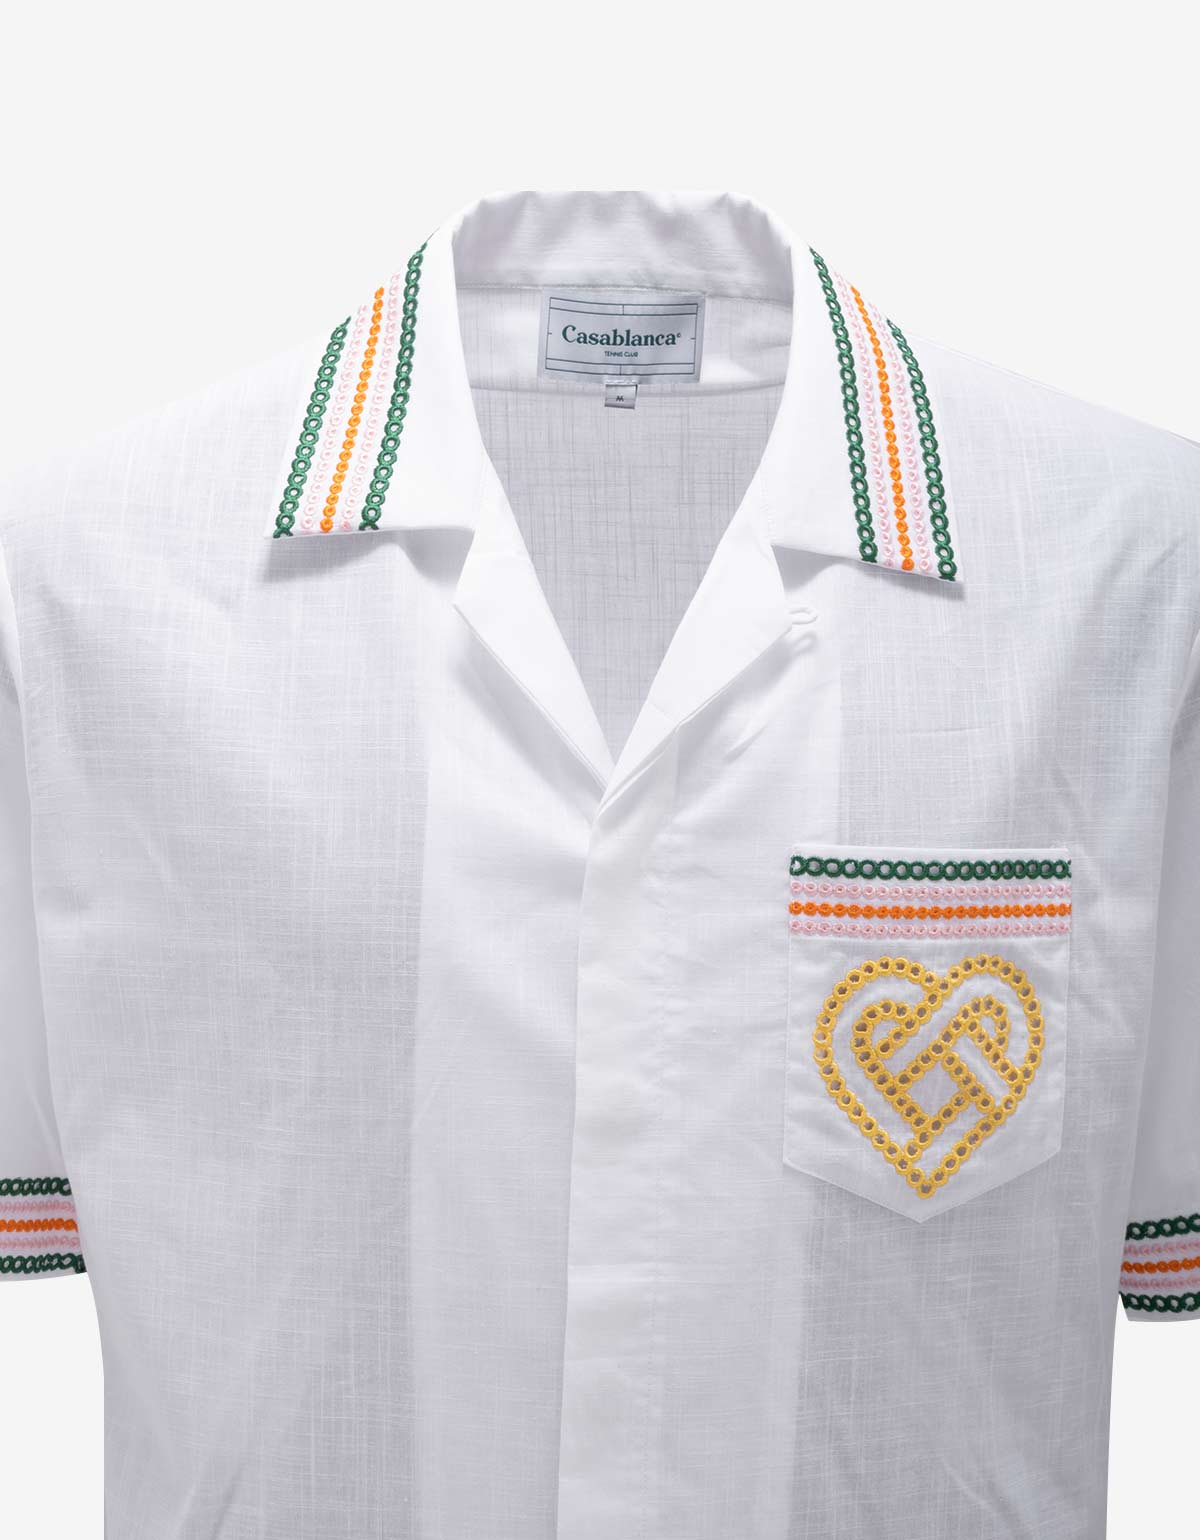 Casablanca White Broderie Anglaise Gradient Hearts Shirt